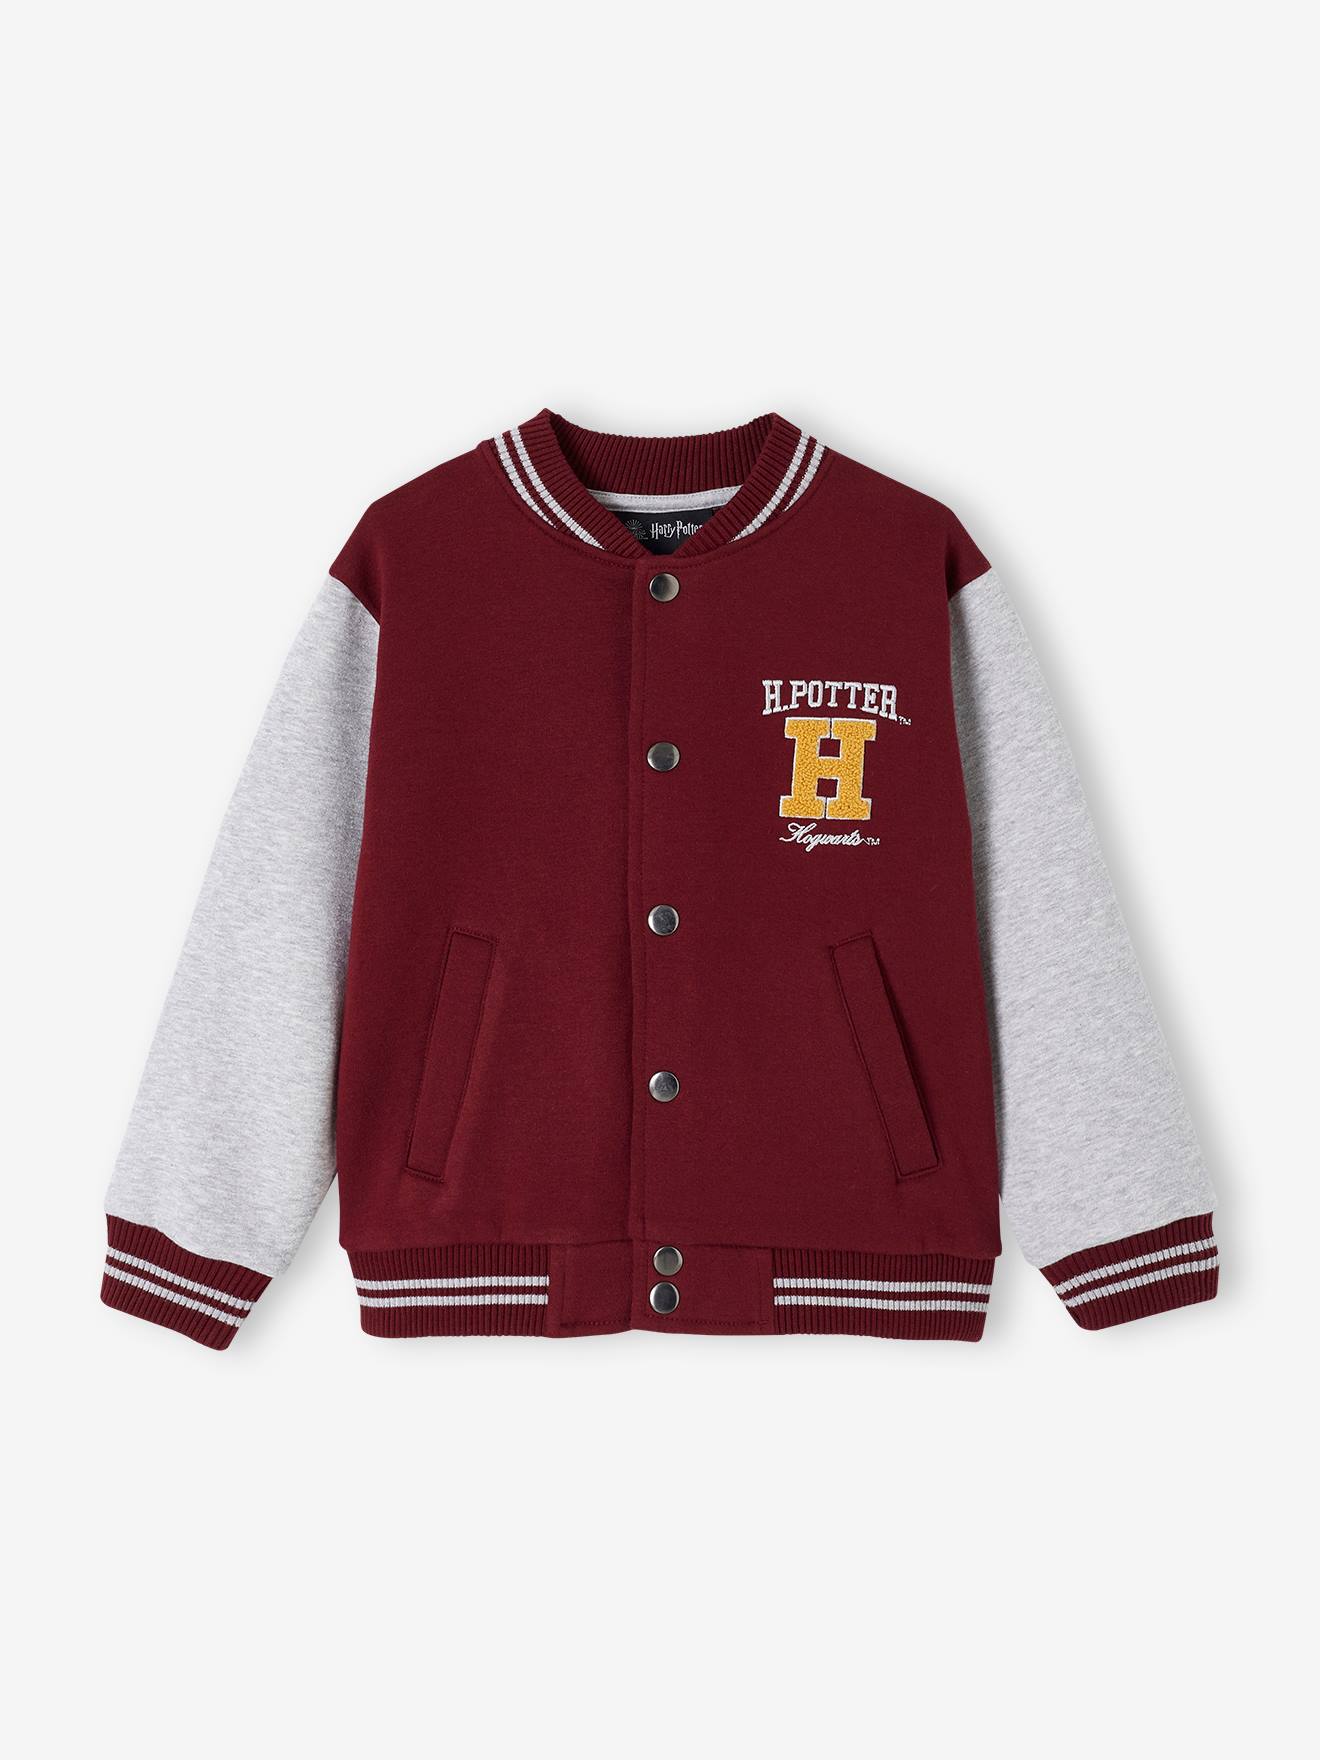 College-Style Harry Potter(r) Jacket for Boys bordeaux red